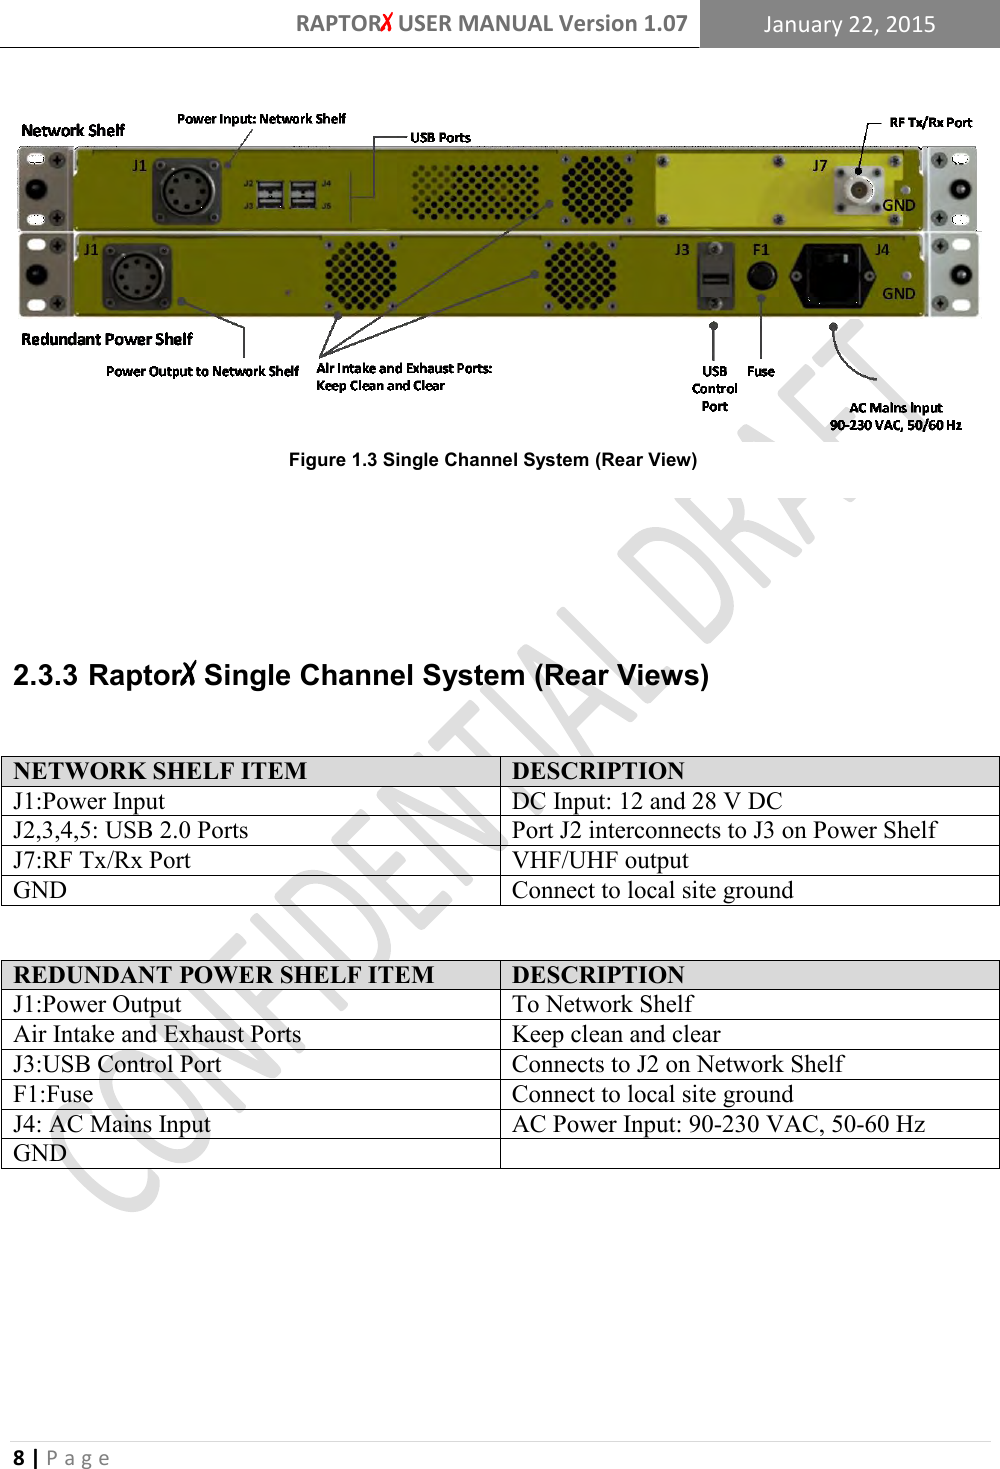 RAPTORX USER MANUAL Version 1.07 January 22, 2015  8 | P a g e        RaptorX Single Channel System (Rear Views) 2.3.3 NETWORK SHELF ITEM DESCRIPTION J1:Power Input DC Input: 12 and 28 V DC J2,3,4,5: USB 2.0 Ports Port J2 interconnects to J3 on Power Shelf J7:RF Tx/Rx Port VHF/UHF output GND Connect to local site ground  REDUNDANT POWER SHELF ITEM DESCRIPTION J1:Power Output To Network Shelf Air Intake and Exhaust Ports Keep clean and clear J3:USB Control Port Connects to J2 on Network Shelf F1:Fuse Connect to local site ground J4: AC Mains Input AC Power Input: 90-230 VAC, 50-60 Hz GND      Figure 1.3 Single Channel System (Rear View)  